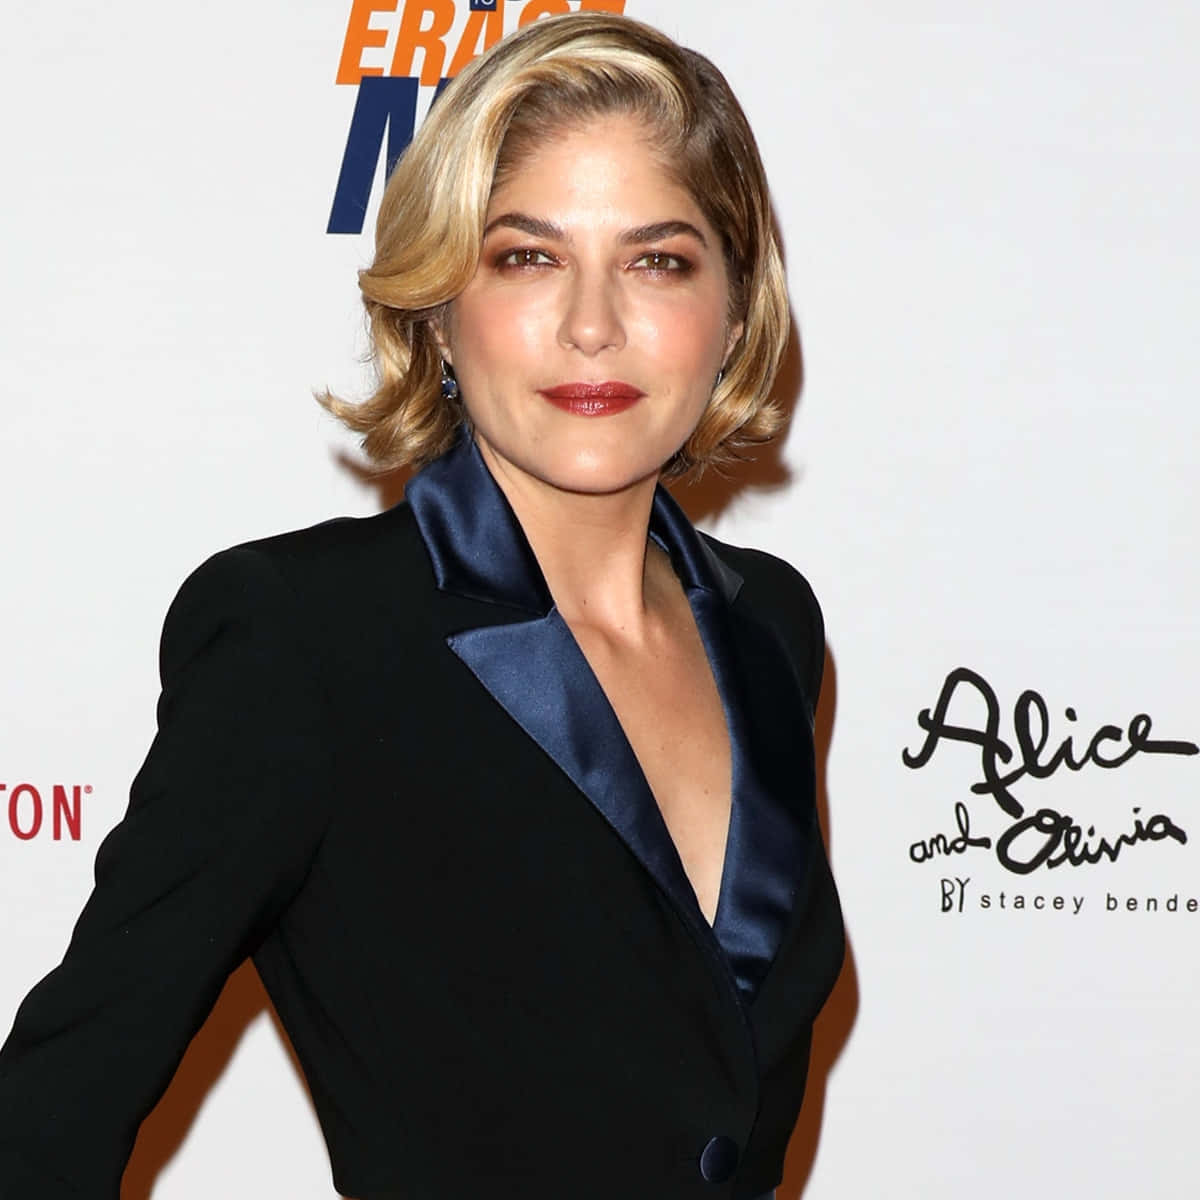 Caption: Selma Blair stunning in stylish outfit Wallpaper